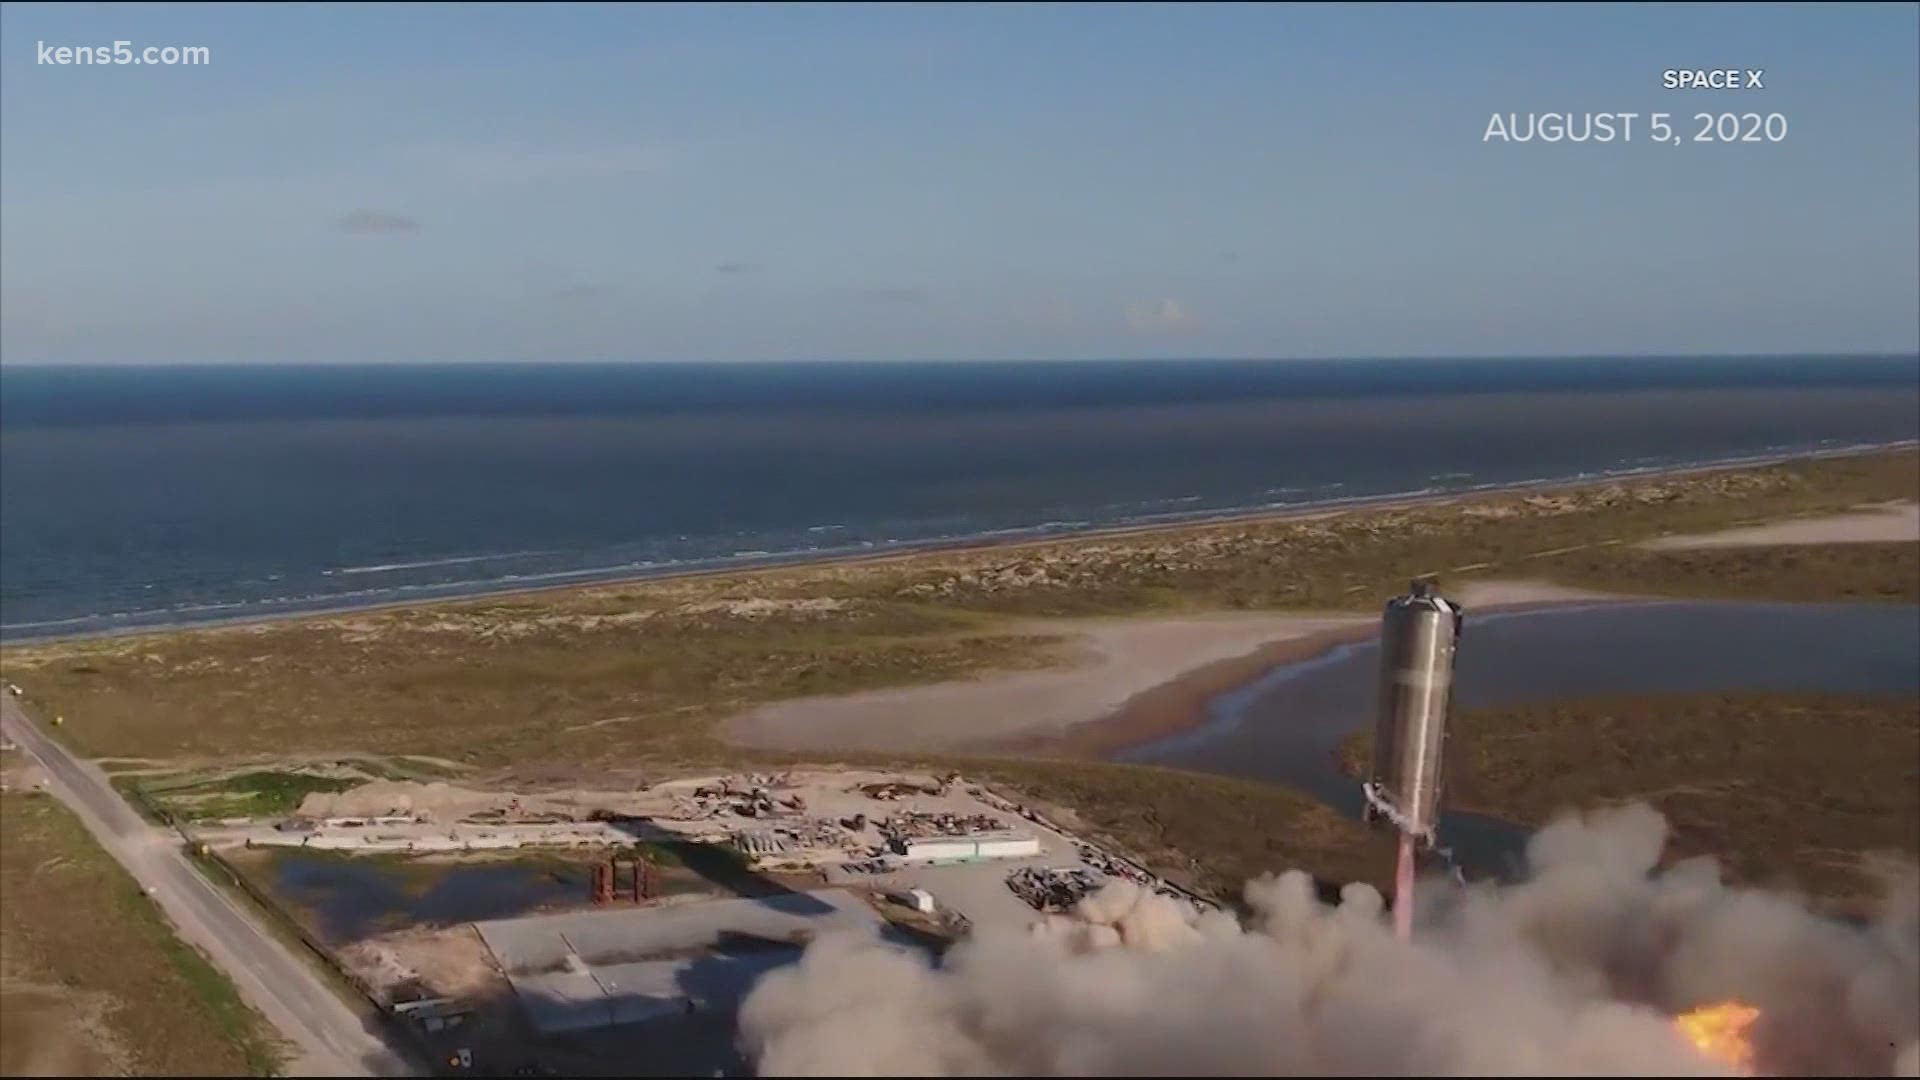 The FAA says SpaceX has made necessary changes that diminish risk to the public.